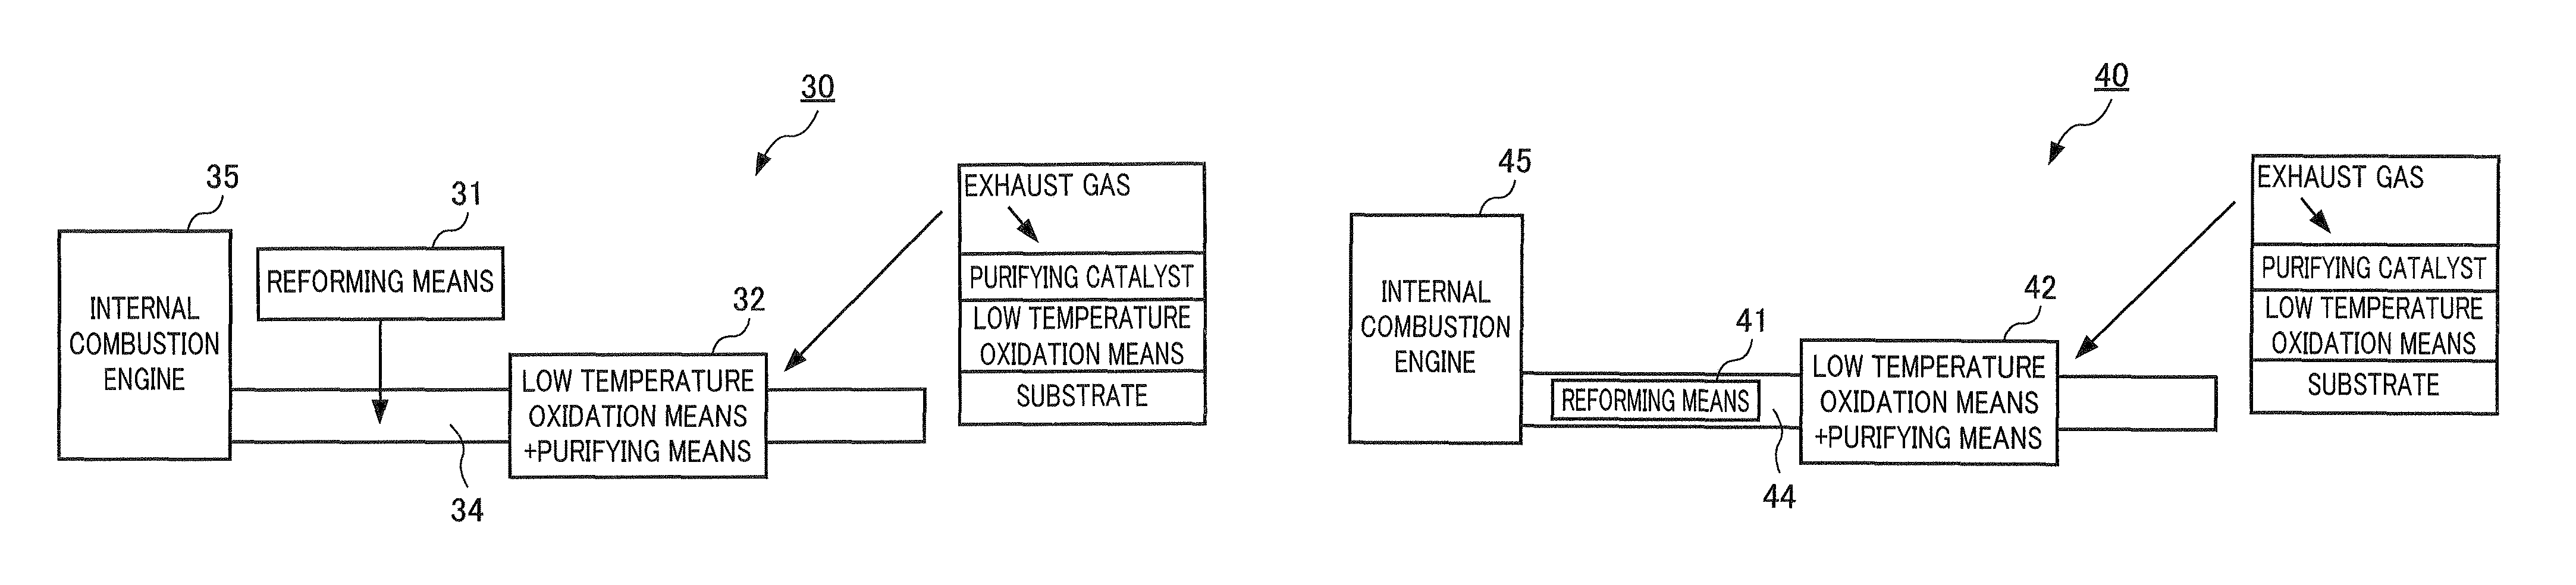 Exhaust gas cleaner